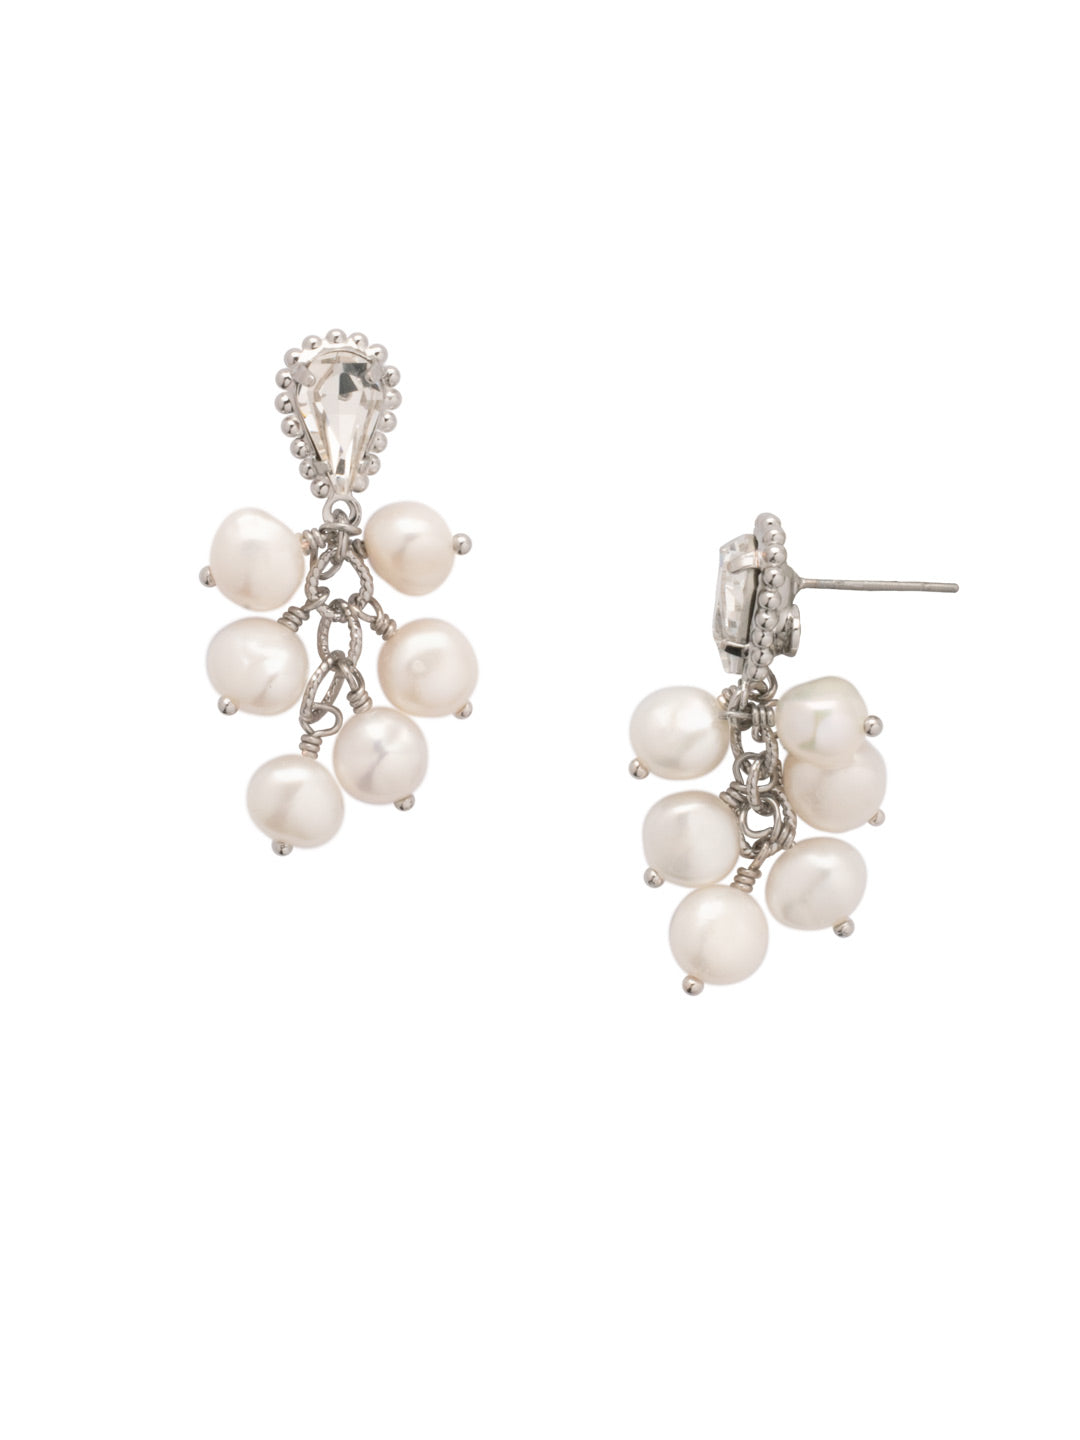 Rayen Dangle Earrings - EFH4PDMDP - <p>The Rayen Dangle Earrings feature several freshwater pearls dangling from a pear cut crystal. From Sorrelli's Modern Pearl collection in our Palladium finish.</p>